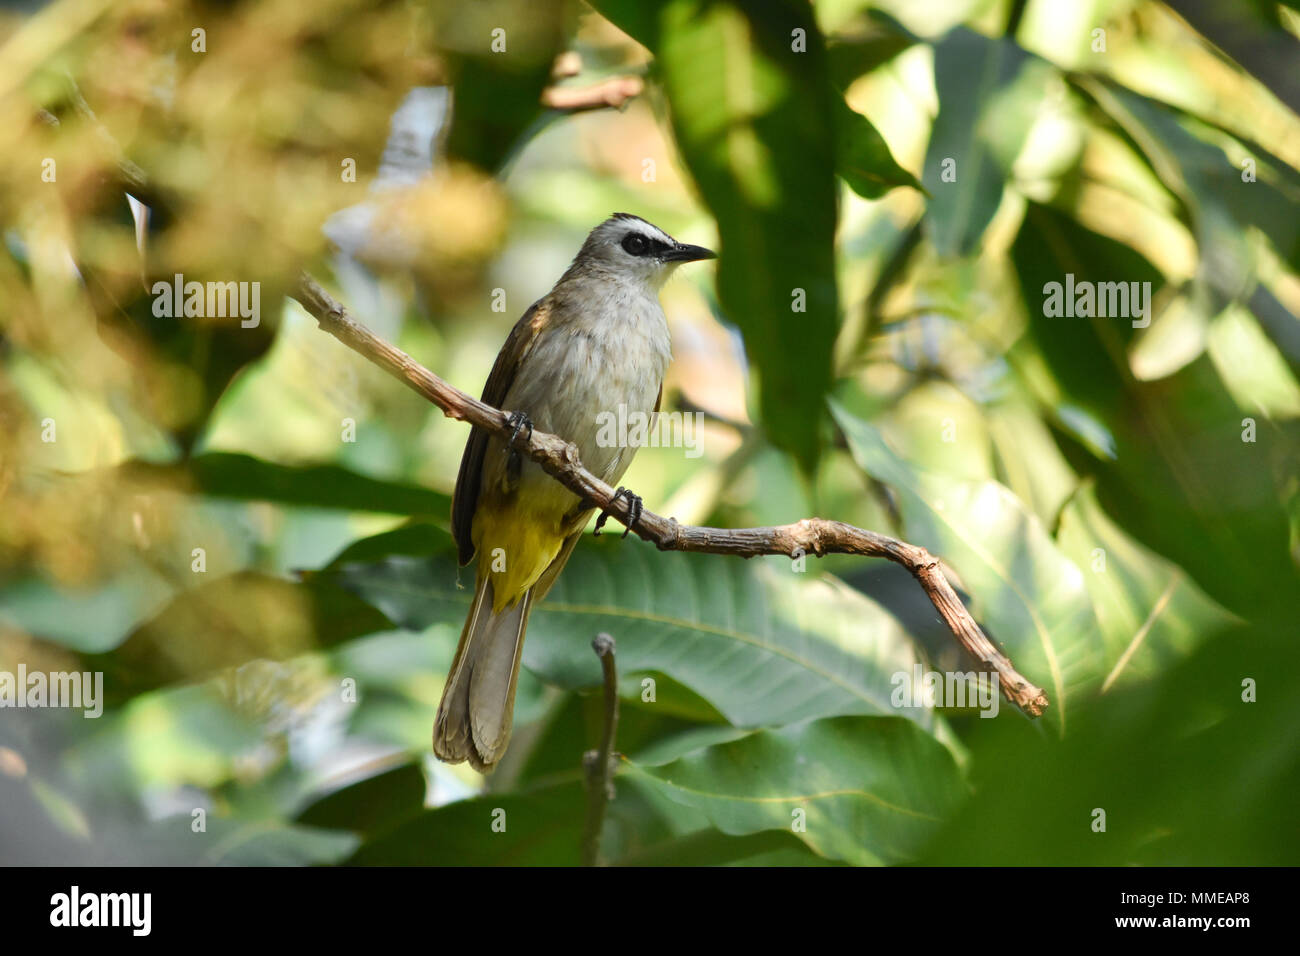 Yellow-vented Bulbul Pycnonotus goiavier perching on mango branch with green leaves background. Stock Photo